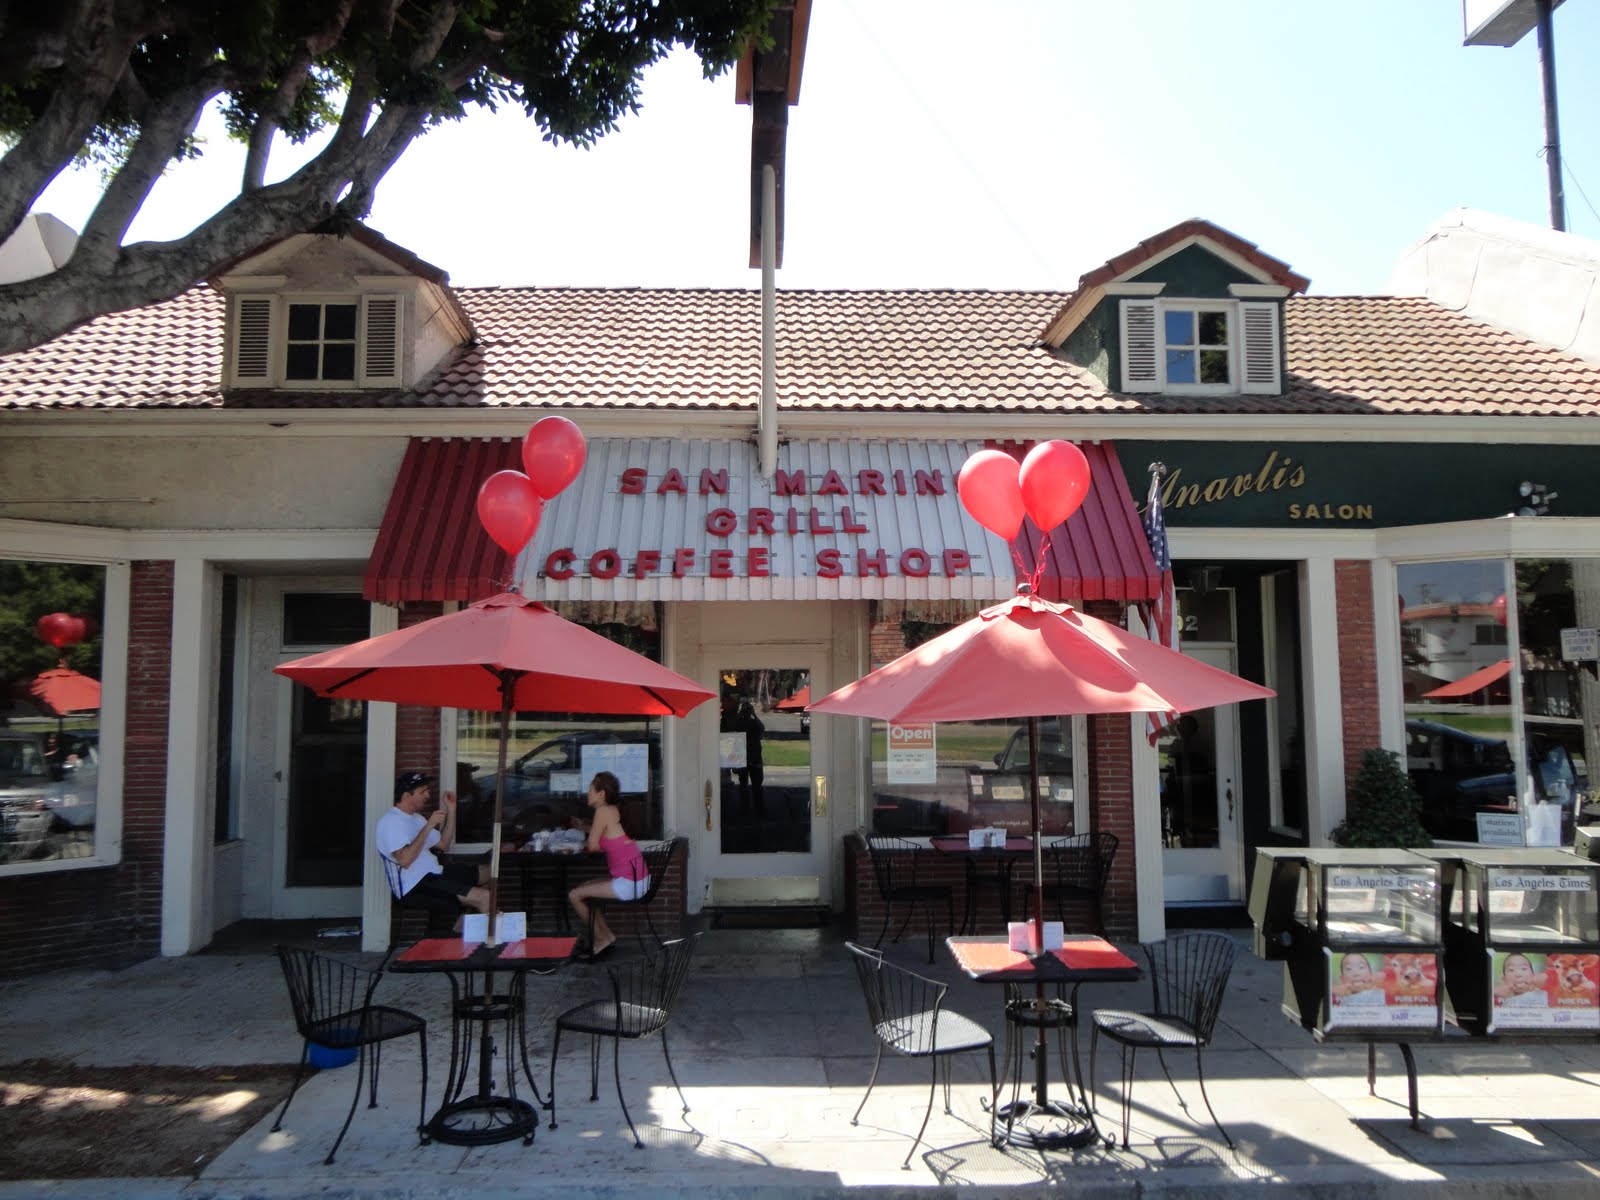 Dinerwood: Los Angeles Diner Reviews: San Marino Grill Coffee Shop